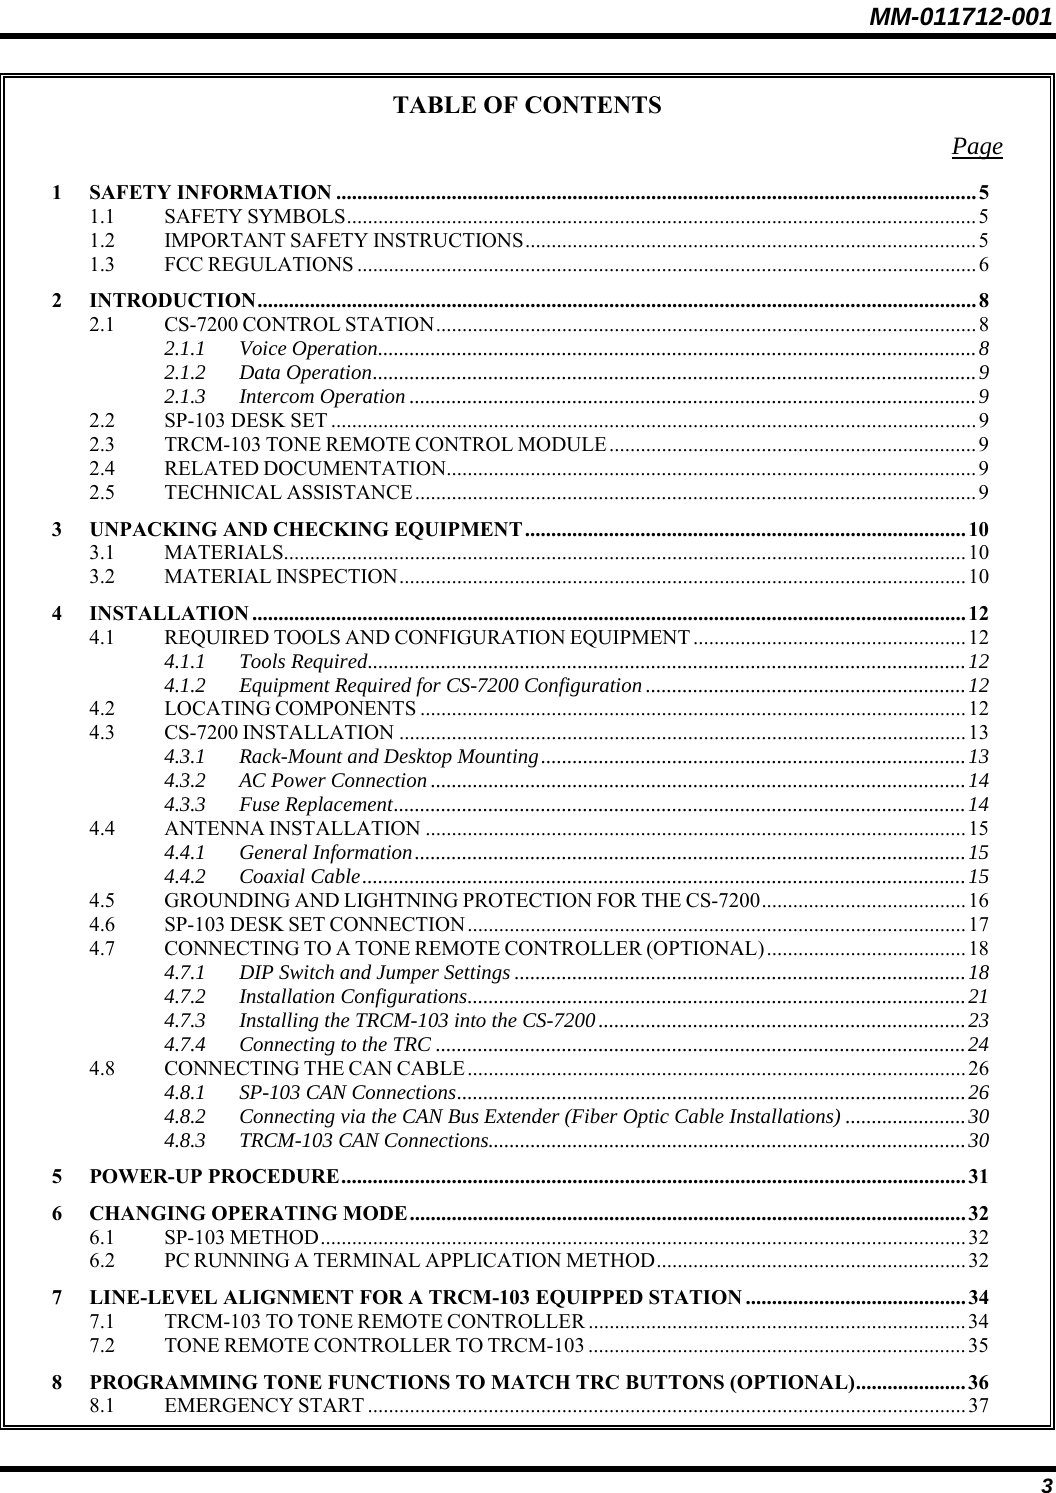 MM-011712-001 3 TABLE OF CONTENTS Page 1 SAFETY INFORMATION ..........................................................................................................................5 1.1 SAFETY SYMBOLS........................................................................................................................ 5 1.2 IMPORTANT SAFETY INSTRUCTIONS......................................................................................5 1.3 FCC REGULATIONS ......................................................................................................................6 2 INTRODUCTION......................................................................................................................................... 8 2.1 CS-7200 CONTROL STATION.......................................................................................................8 2.1.1 Voice Operation..................................................................................................................8 2.1.2 Data Operation...................................................................................................................9 2.1.3 Intercom Operation ............................................................................................................9 2.2 SP-103 DESK SET ...........................................................................................................................9 2.3 TRCM-103 TONE REMOTE CONTROL MODULE......................................................................9 2.4 RELATED DOCUMENTATION.....................................................................................................9 2.5 TECHNICAL ASSISTANCE........................................................................................................... 9 3 UNPACKING AND CHECKING EQUIPMENT....................................................................................10 3.1 MATERIALS..................................................................................................................................10 3.2 MATERIAL INSPECTION............................................................................................................ 10 4 INSTALLATION ........................................................................................................................................12 4.1 REQUIRED TOOLS AND CONFIGURATION EQUIPMENT ....................................................12 4.1.1 Tools Required..................................................................................................................12 4.1.2 Equipment Required for CS-7200 Configuration.............................................................12 4.2 LOCATING COMPONENTS ........................................................................................................12 4.3 CS-7200 INSTALLATION ............................................................................................................13 4.3.1 Rack-Mount and Desktop Mounting.................................................................................13 4.3.2 AC Power Connection ......................................................................................................14 4.3.3 Fuse Replacement.............................................................................................................14 4.4 ANTENNA INSTALLATION .......................................................................................................15 4.4.1 General Information.........................................................................................................15 4.4.2 Coaxial Cable...................................................................................................................15 4.5 GROUNDING AND LIGHTNING PROTECTION FOR THE CS-7200.......................................16 4.6 SP-103 DESK SET CONNECTION...............................................................................................17 4.7 CONNECTING TO A TONE REMOTE CONTROLLER (OPTIONAL)...................................... 18 4.7.1 DIP Switch and Jumper Settings ......................................................................................18 4.7.2 Installation Configurations...............................................................................................21 4.7.3 Installing the TRCM-103 into the CS-7200......................................................................23 4.7.4 Connecting to the TRC .....................................................................................................24 4.8 CONNECTING THE CAN CABLE...............................................................................................26 4.8.1 SP-103 CAN Connections.................................................................................................26 4.8.2 Connecting via the CAN Bus Extender (Fiber Optic Cable Installations) .......................30 4.8.3 TRCM-103 CAN Connections...........................................................................................30 5 POWER-UP PROCEDURE.......................................................................................................................31 6 CHANGING OPERATING MODE.......................................................................................................... 32 6.1 SP-103 METHOD...........................................................................................................................32 6.2 PC RUNNING A TERMINAL APPLICATION METHOD........................................................... 32 7 LINE-LEVEL ALIGNMENT FOR A TRCM-103 EQUIPPED STATION ..........................................34 7.1 TRCM-103 TO TONE REMOTE CONTROLLER ........................................................................34 7.2 TONE REMOTE CONTROLLER TO TRCM-103 ........................................................................35 8 PROGRAMMING TONE FUNCTIONS TO MATCH TRC BUTTONS (OPTIONAL).....................36 8.1 EMERGENCY START ..................................................................................................................37 